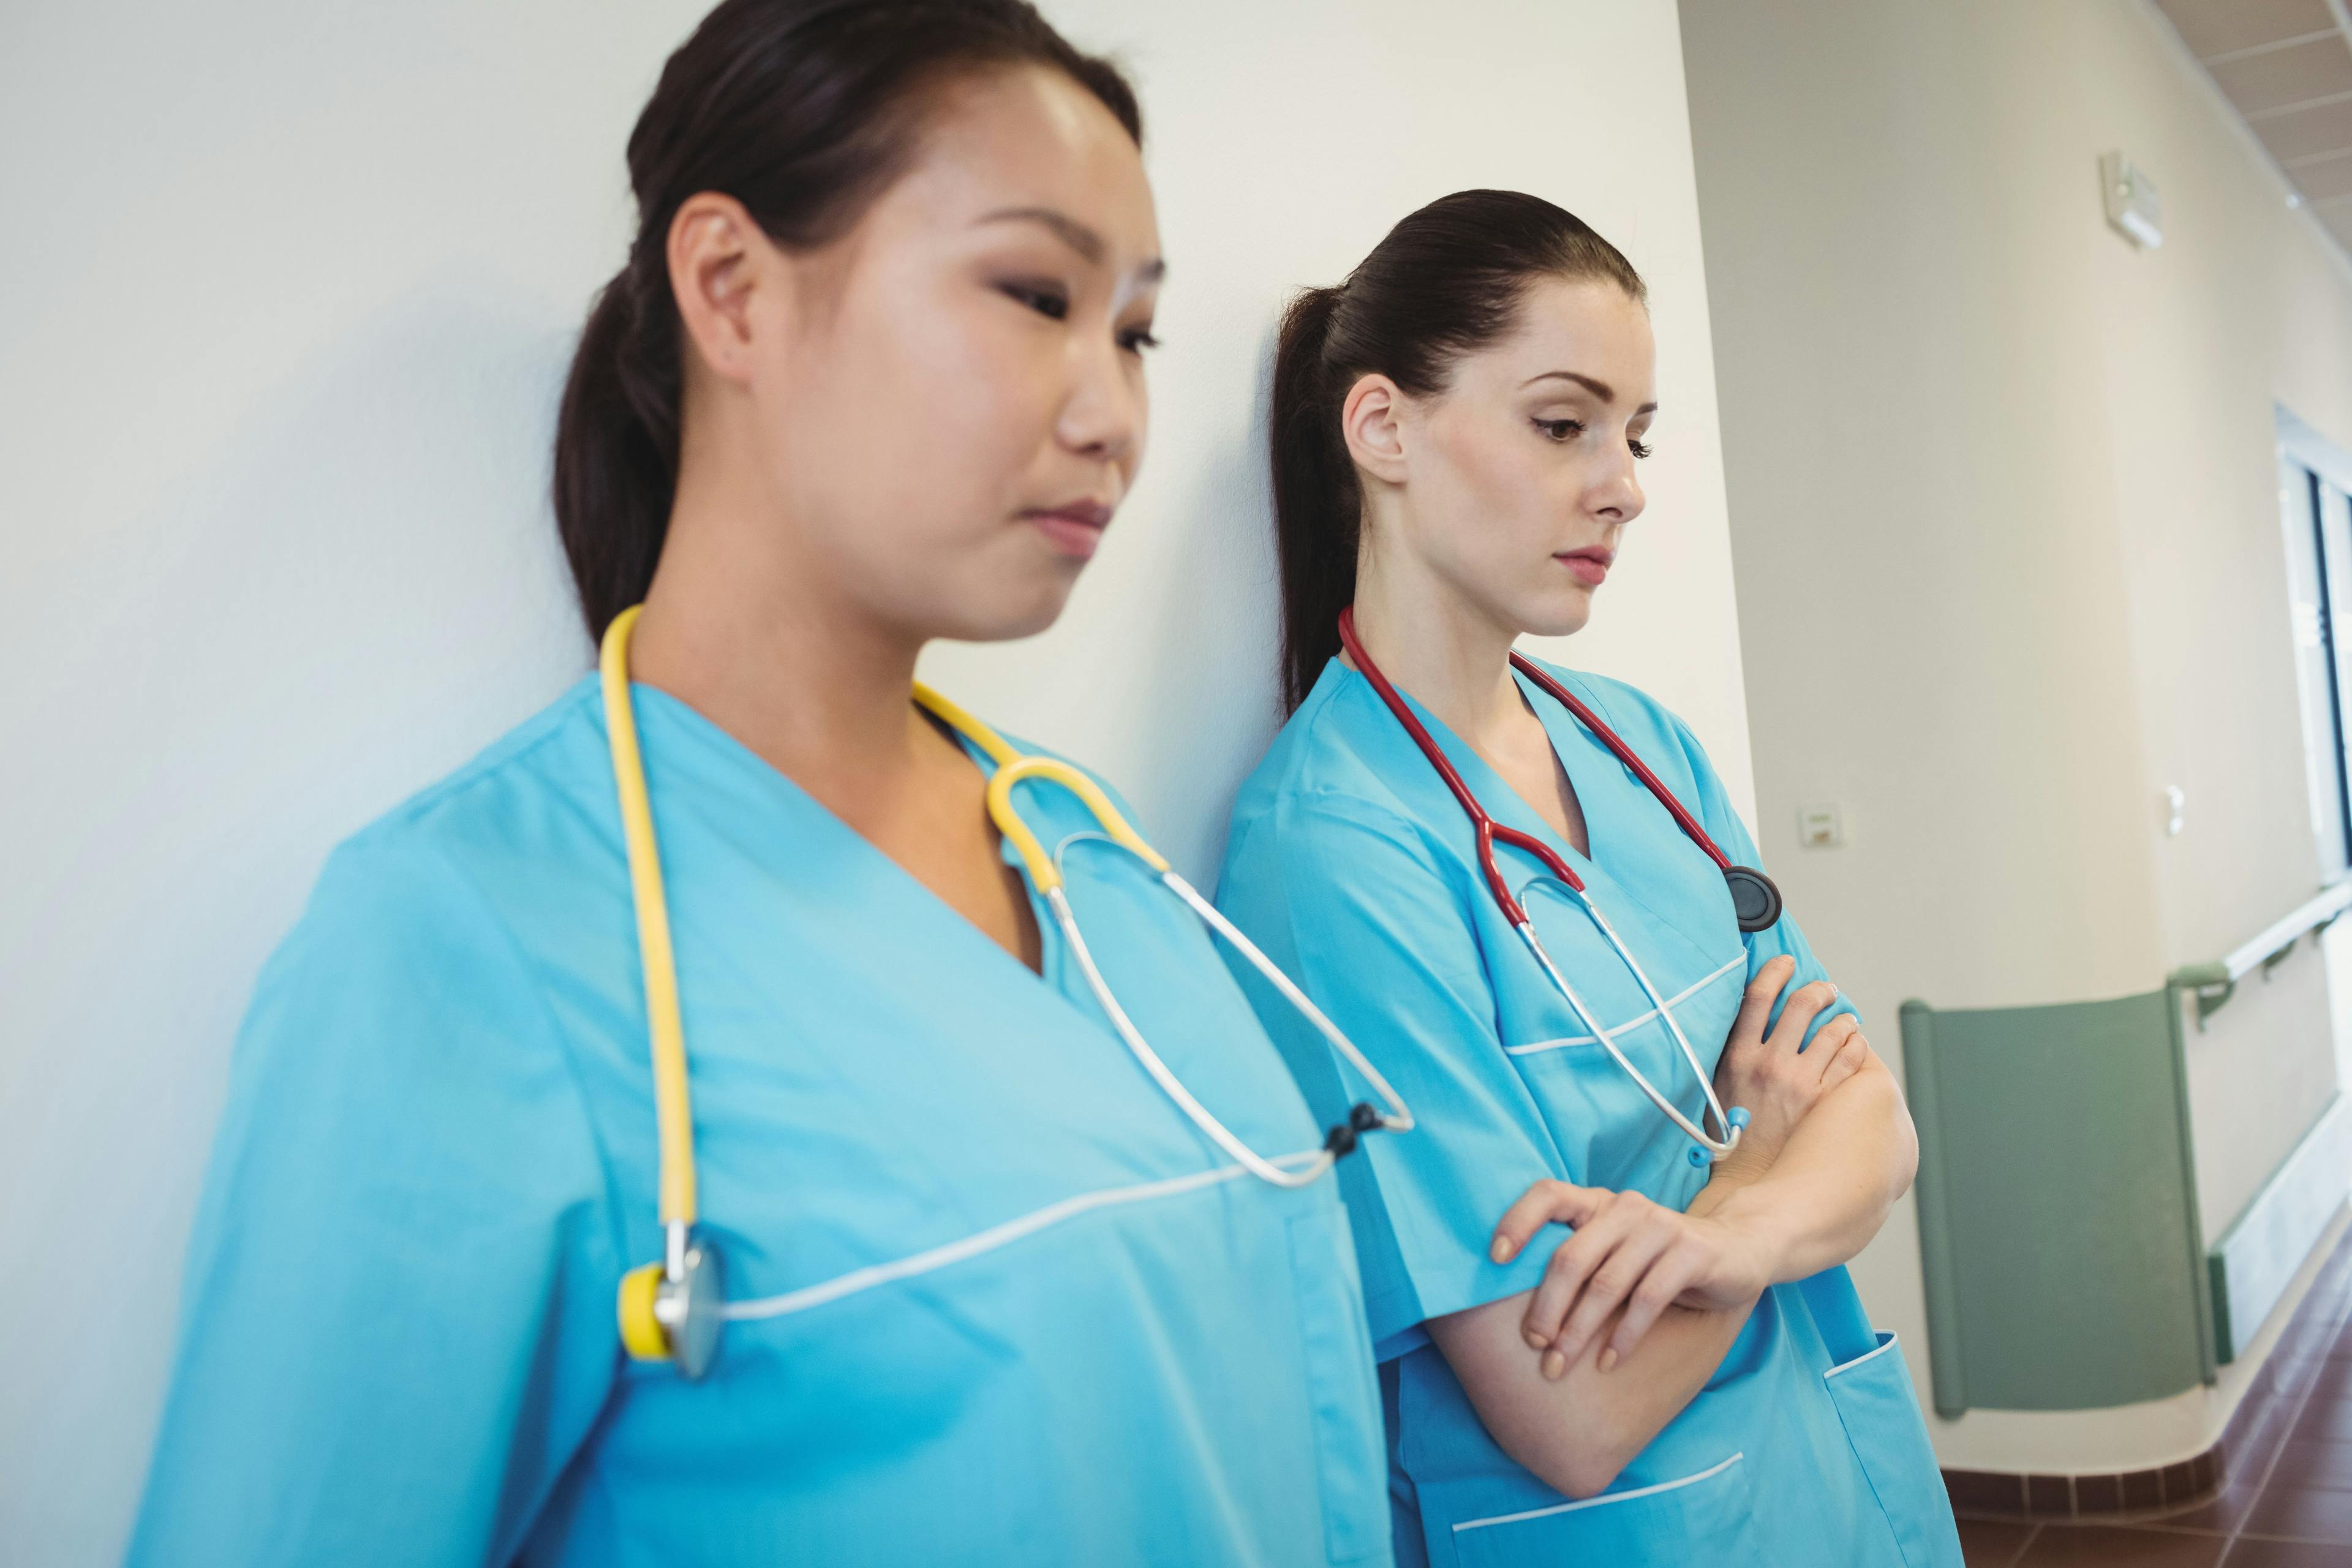 Most nurses say there’s not enough staffing, and many intend to leave